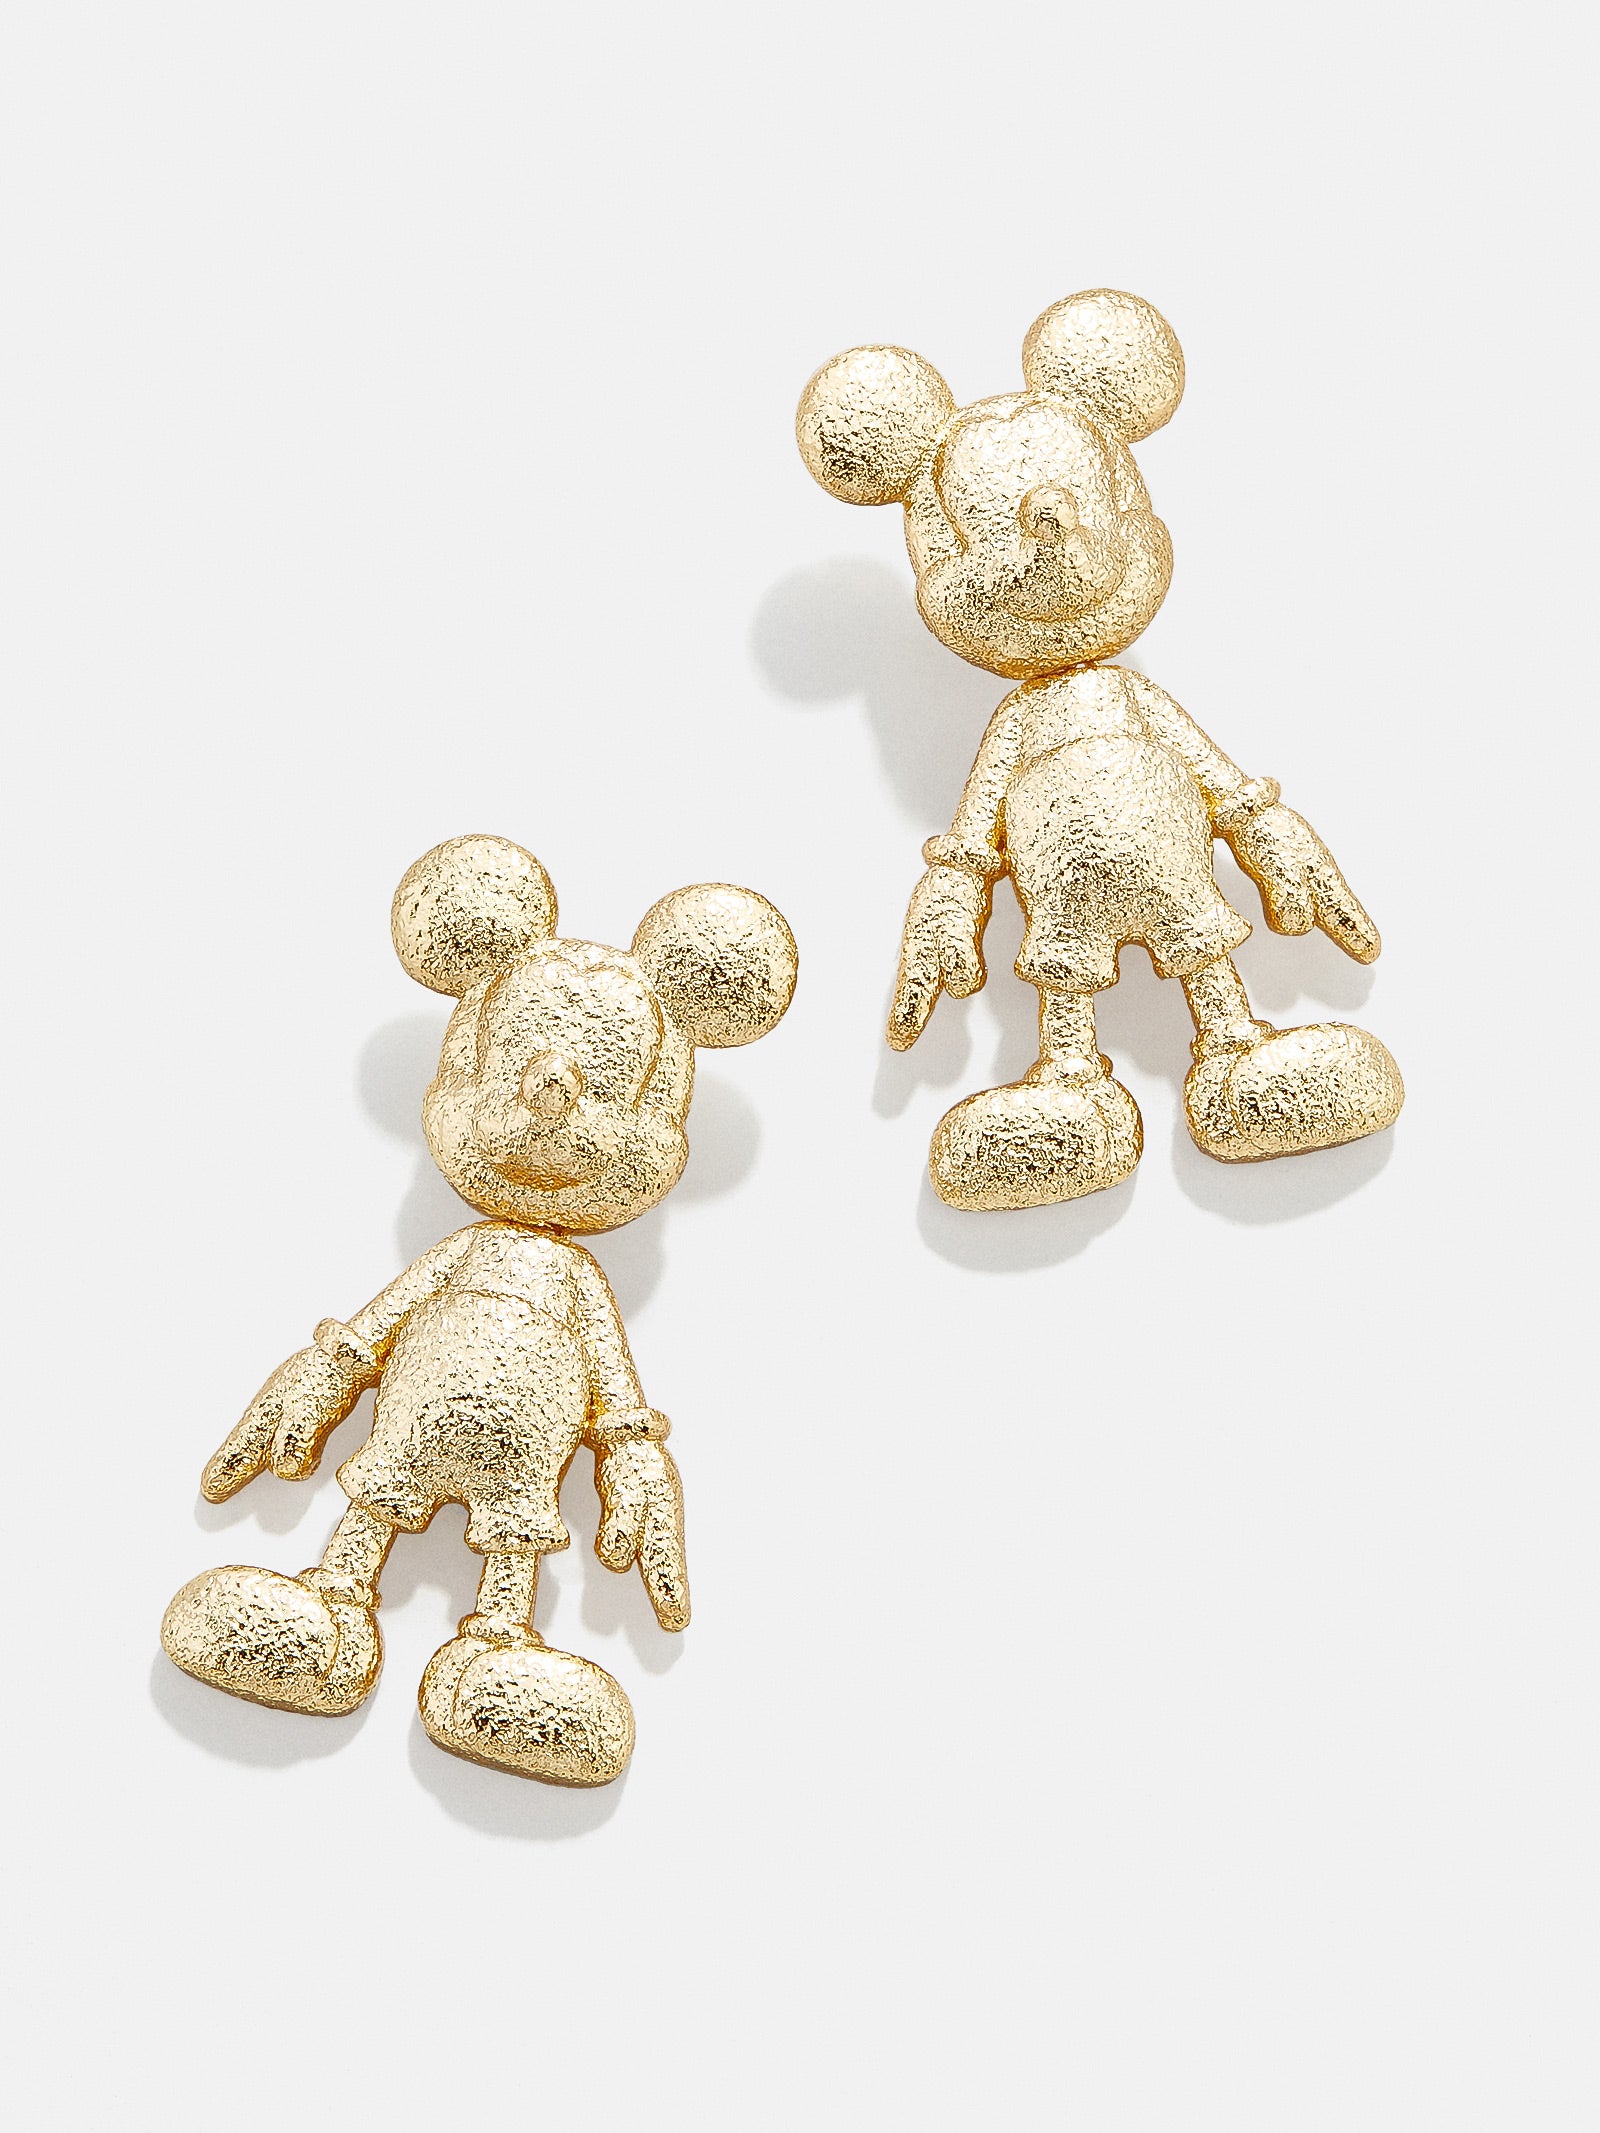 Mickey but make it neutral 🤎 #mickeymouse #baublebar